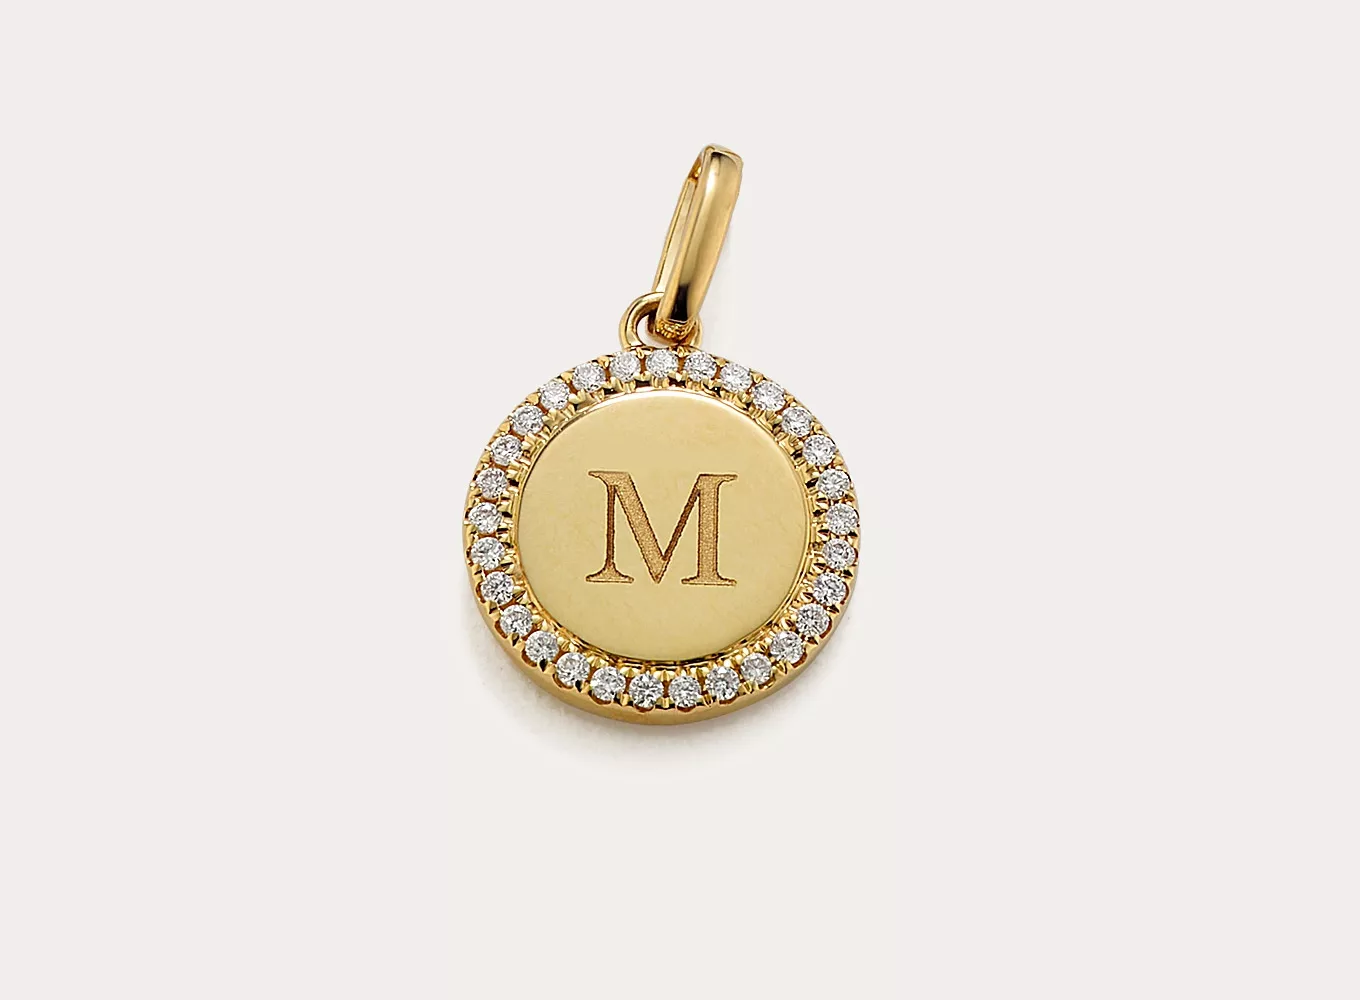 Diamond Halo Engravable Disk Charm. A border of natural diamond accents adds hand-matched sparkle and fire to this 14-karat yellow gold disk charm. Add a custom engraving to make it personal.